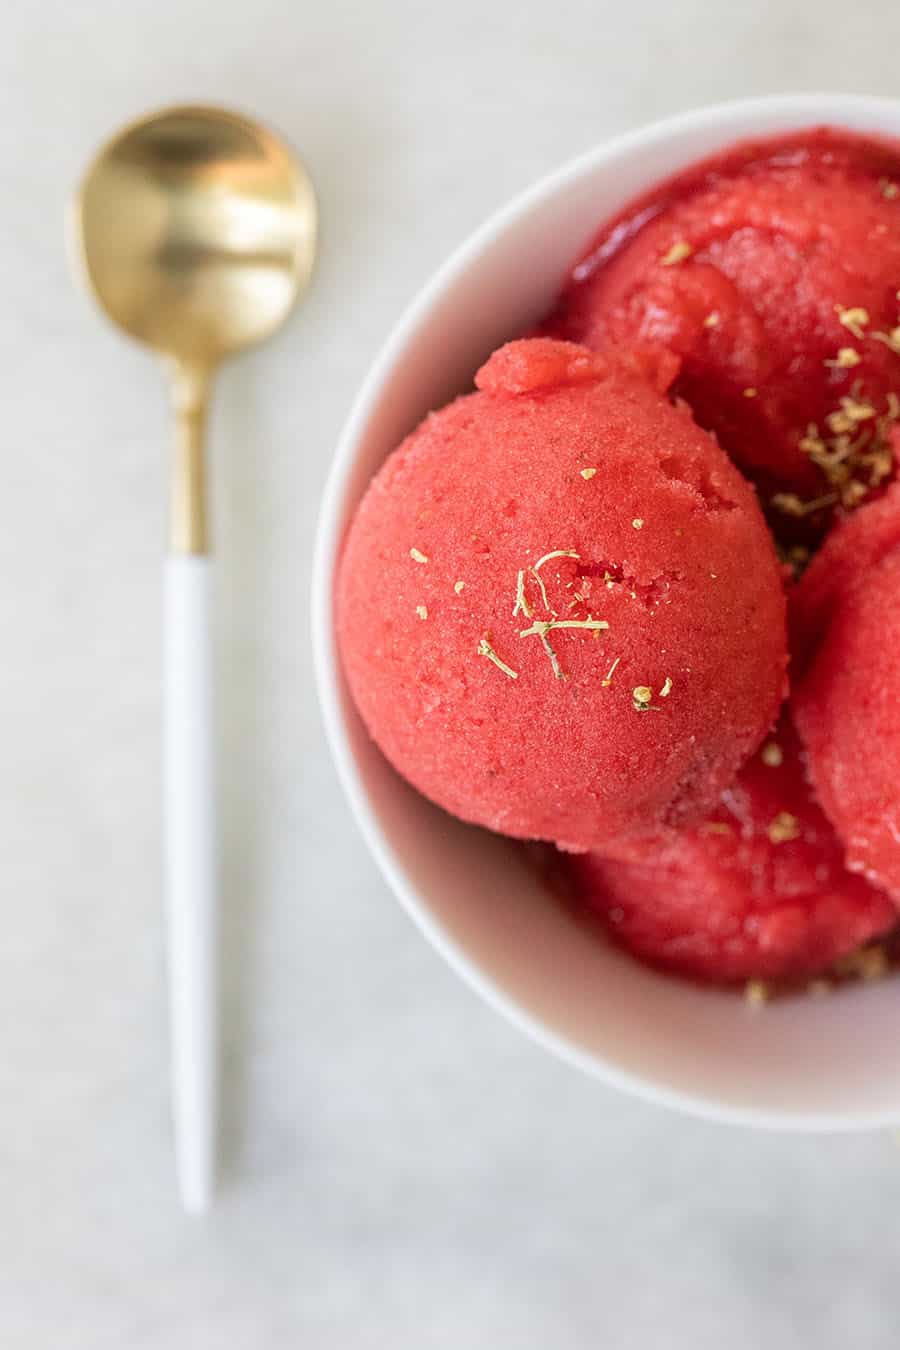 Scoops of strawberry sorbet with elderflower and a gold spoon.